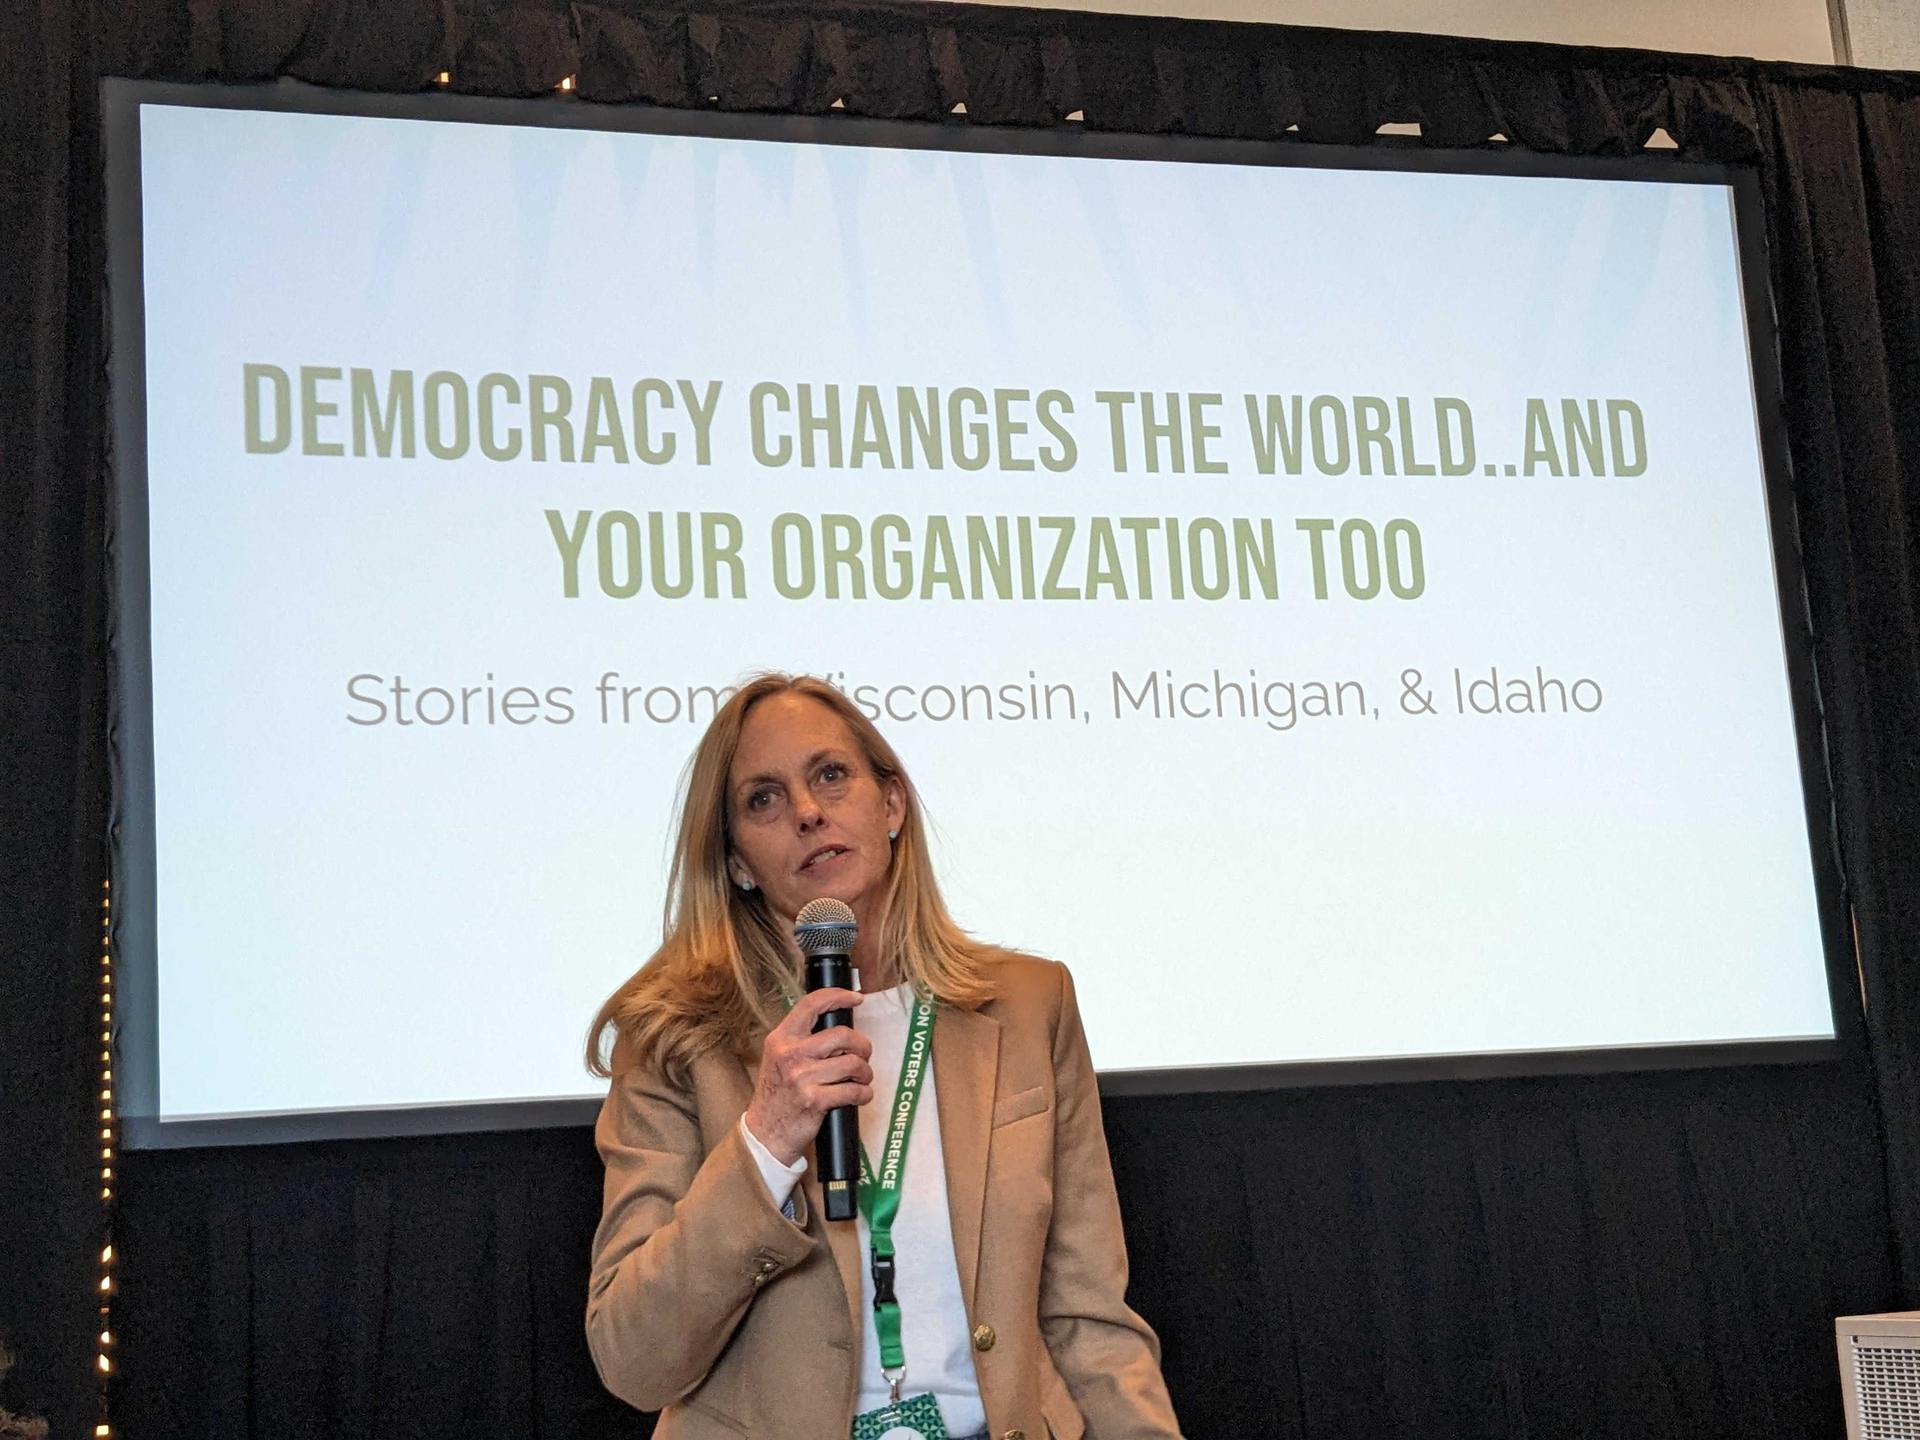 Michigan LCV Executive Director Lisa Wozniak speaking in front of a projector screen while holding a microphone. She has blonde hair and is wearing a tan jacket. 